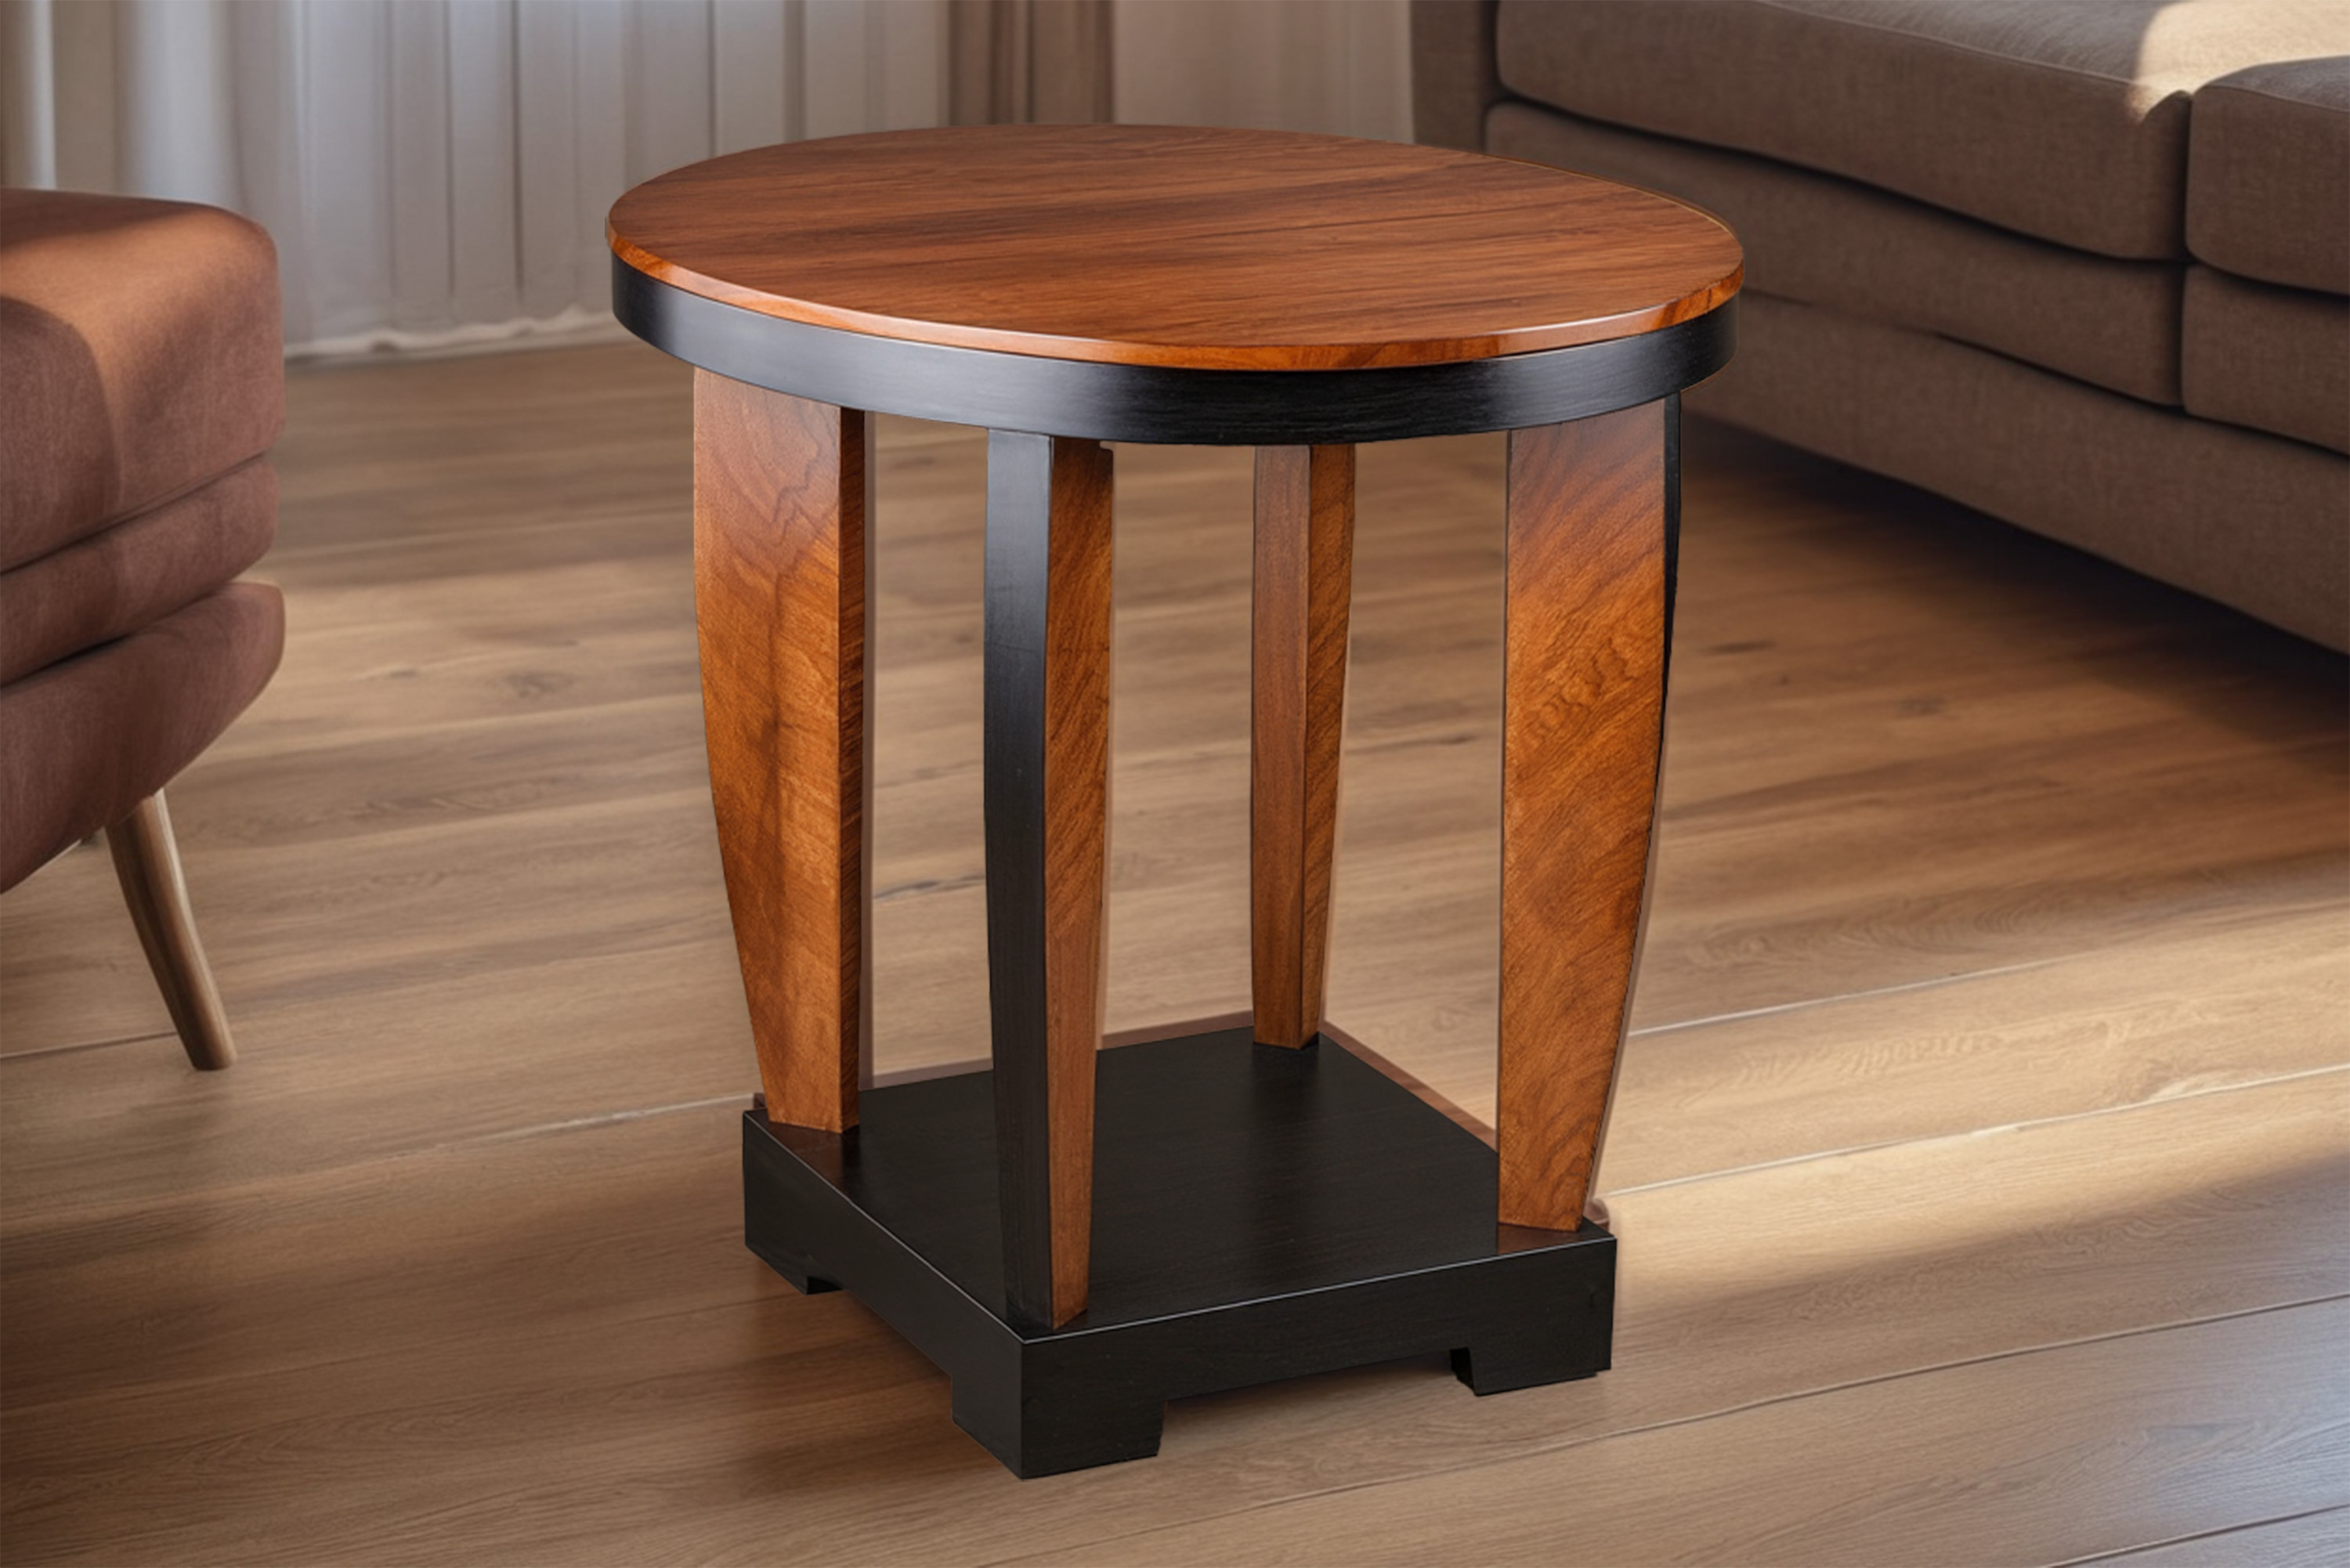 Art Deco side table with walnut and black lacquer